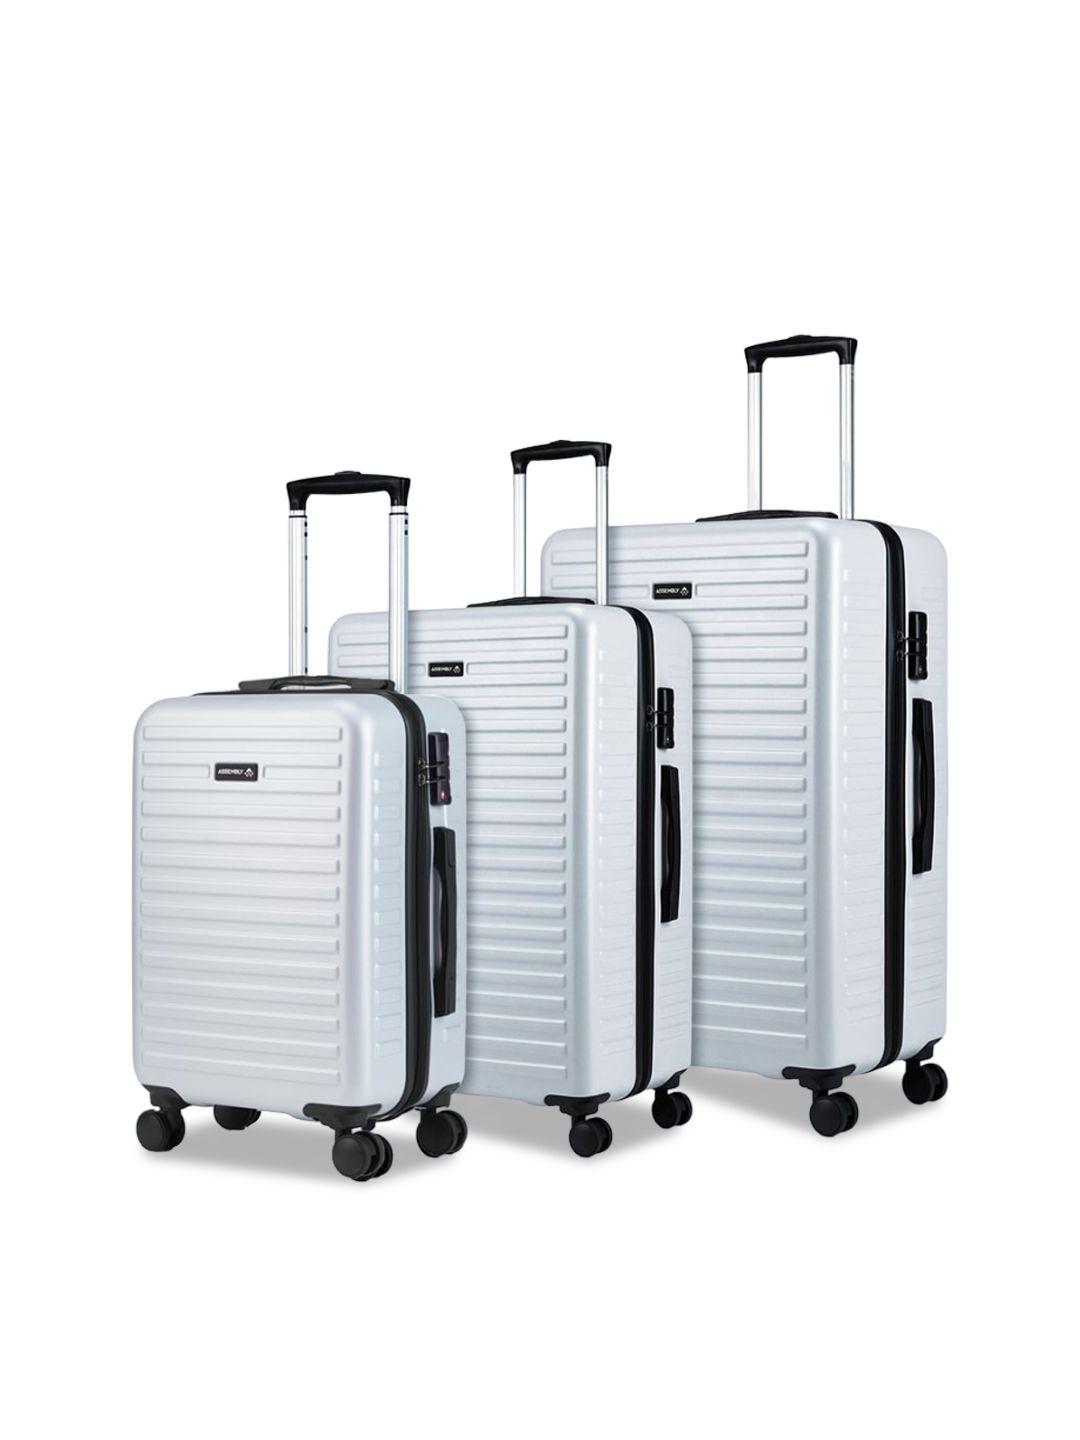 assembly set of 3 textured hard-sided suitcase